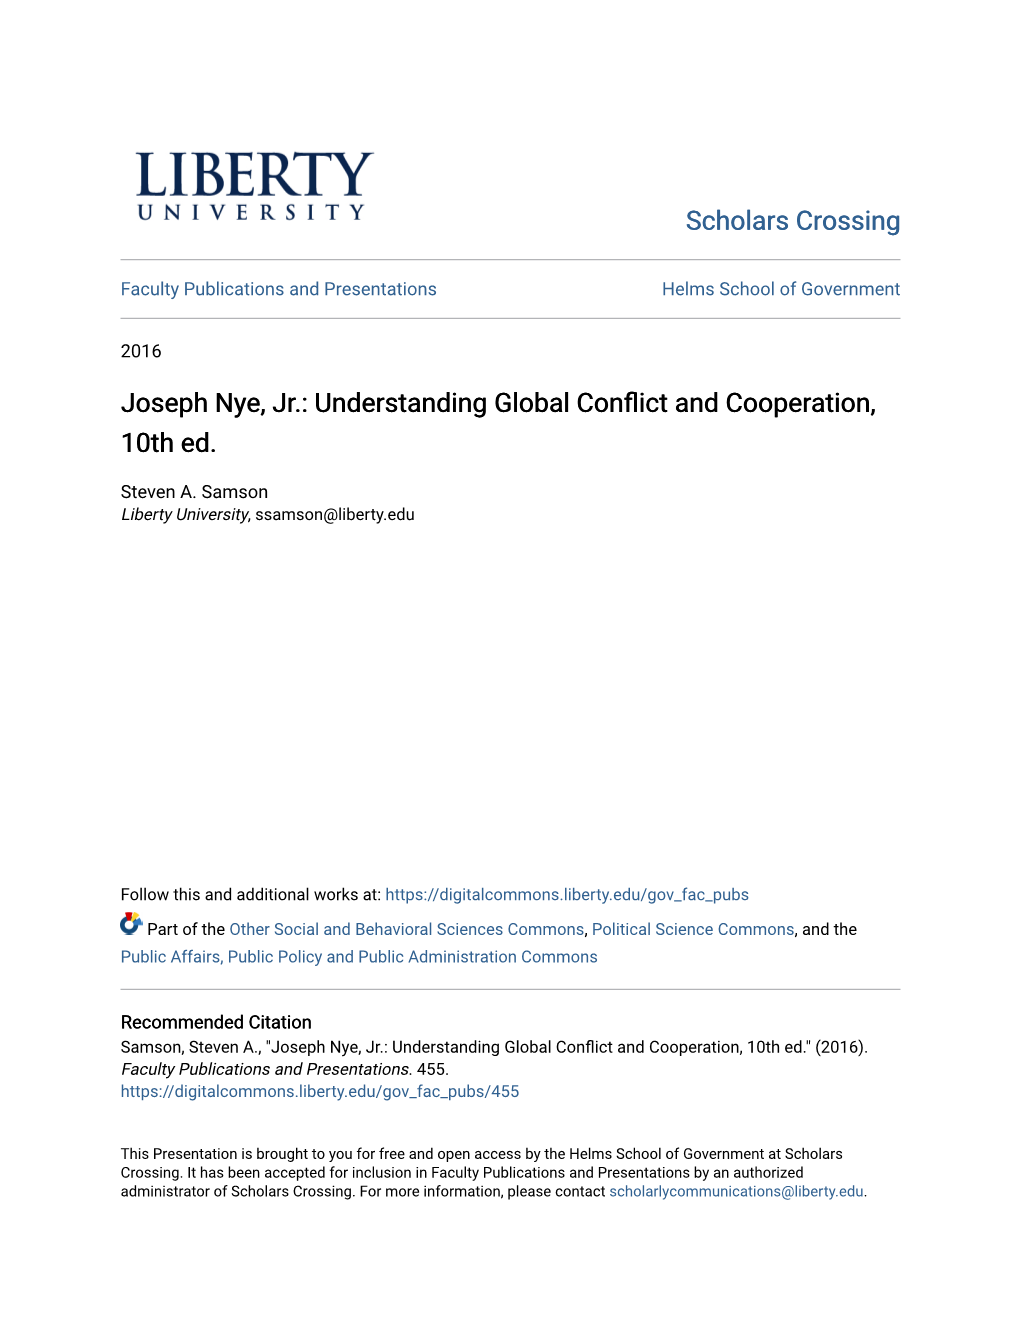 Joseph Nye, Jr.: Understanding Global Conflict and Cooperation, 10Th Ed